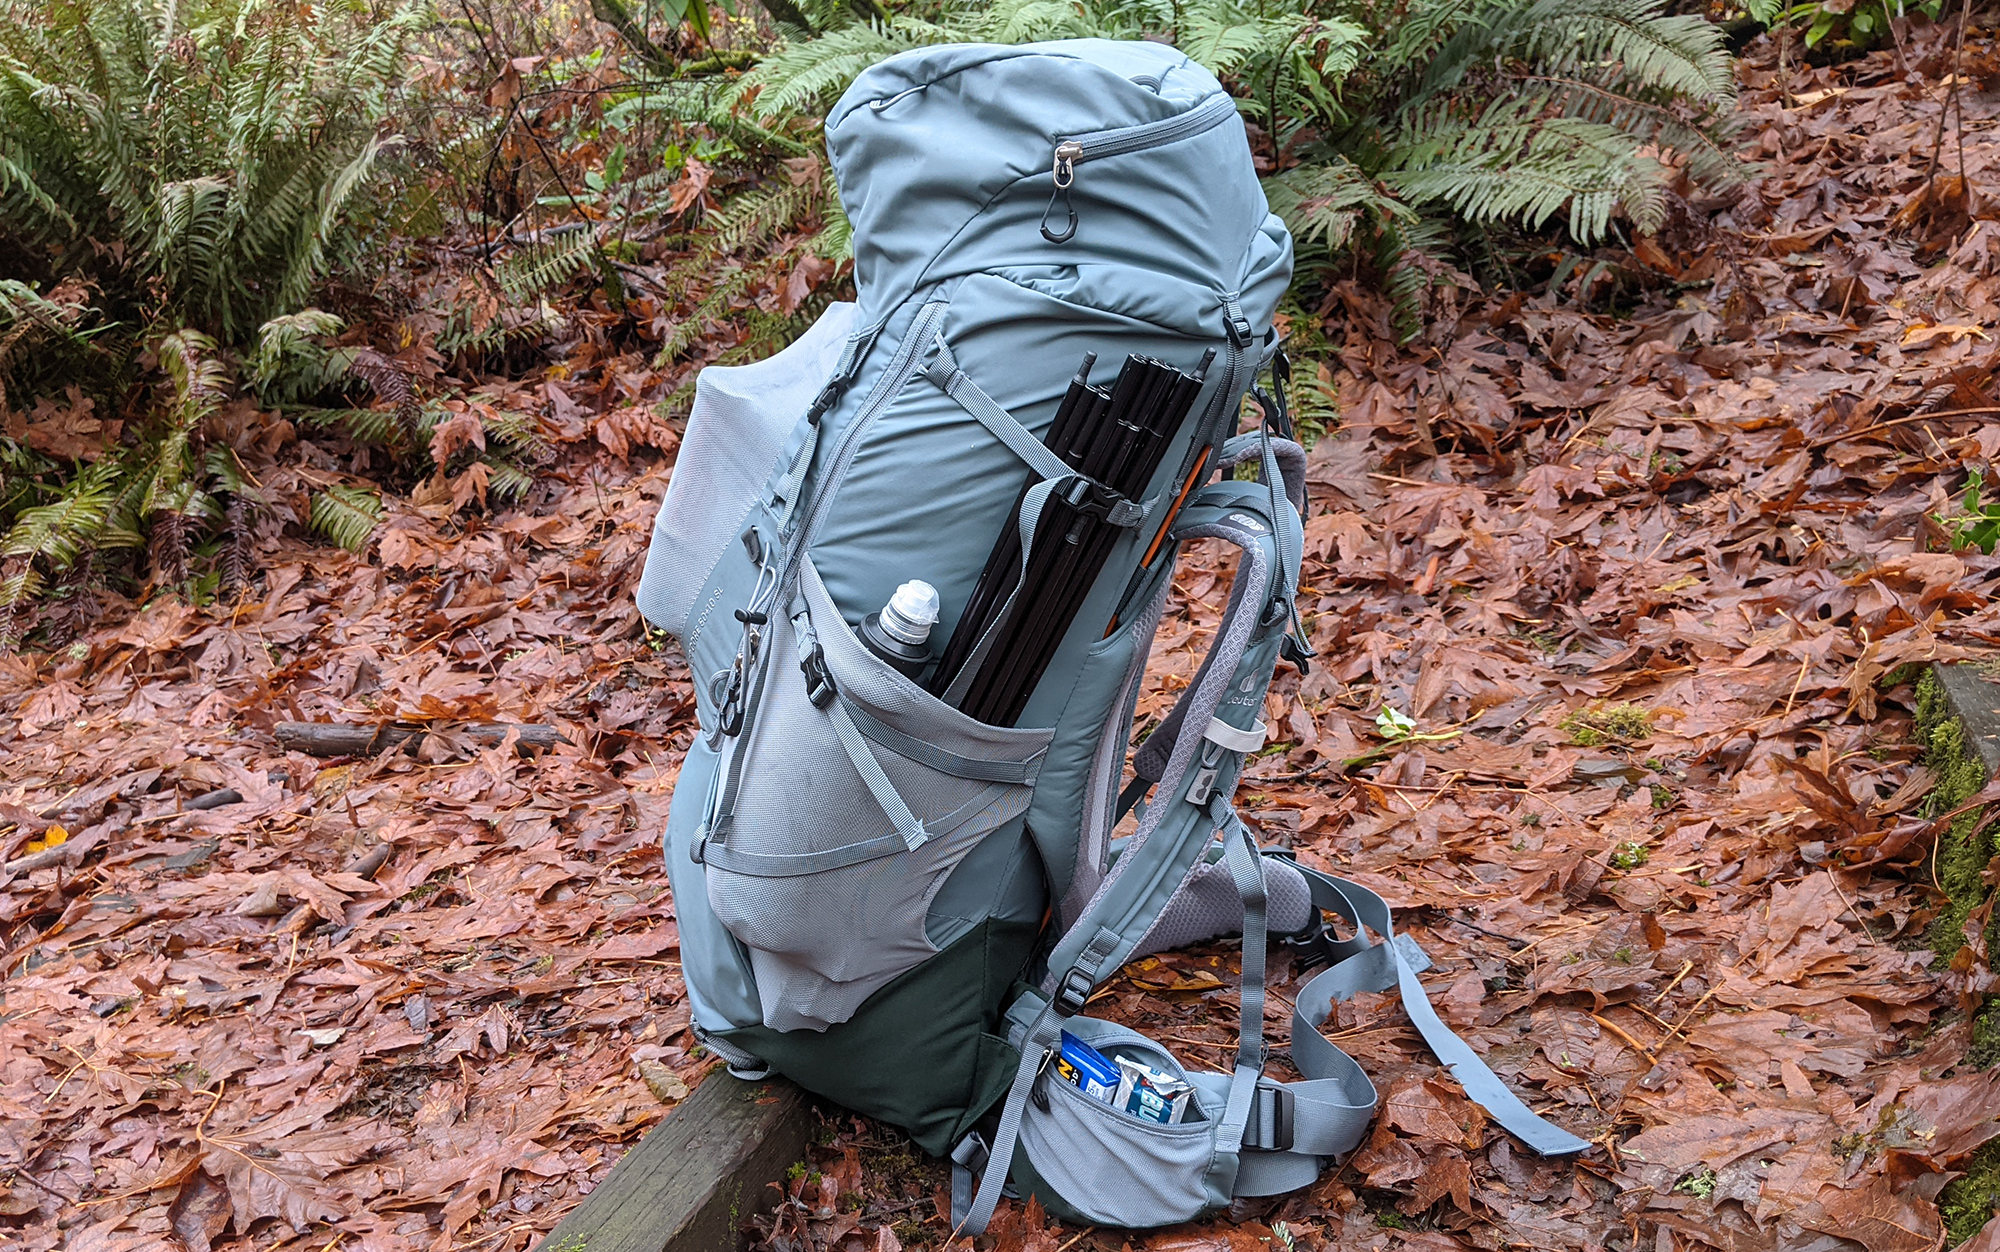 The slight curve of the Deuter Aircontact’s back panel provided meaningful airflow, but the additional pressure may be uncomfortable for women carrying heavier loads.